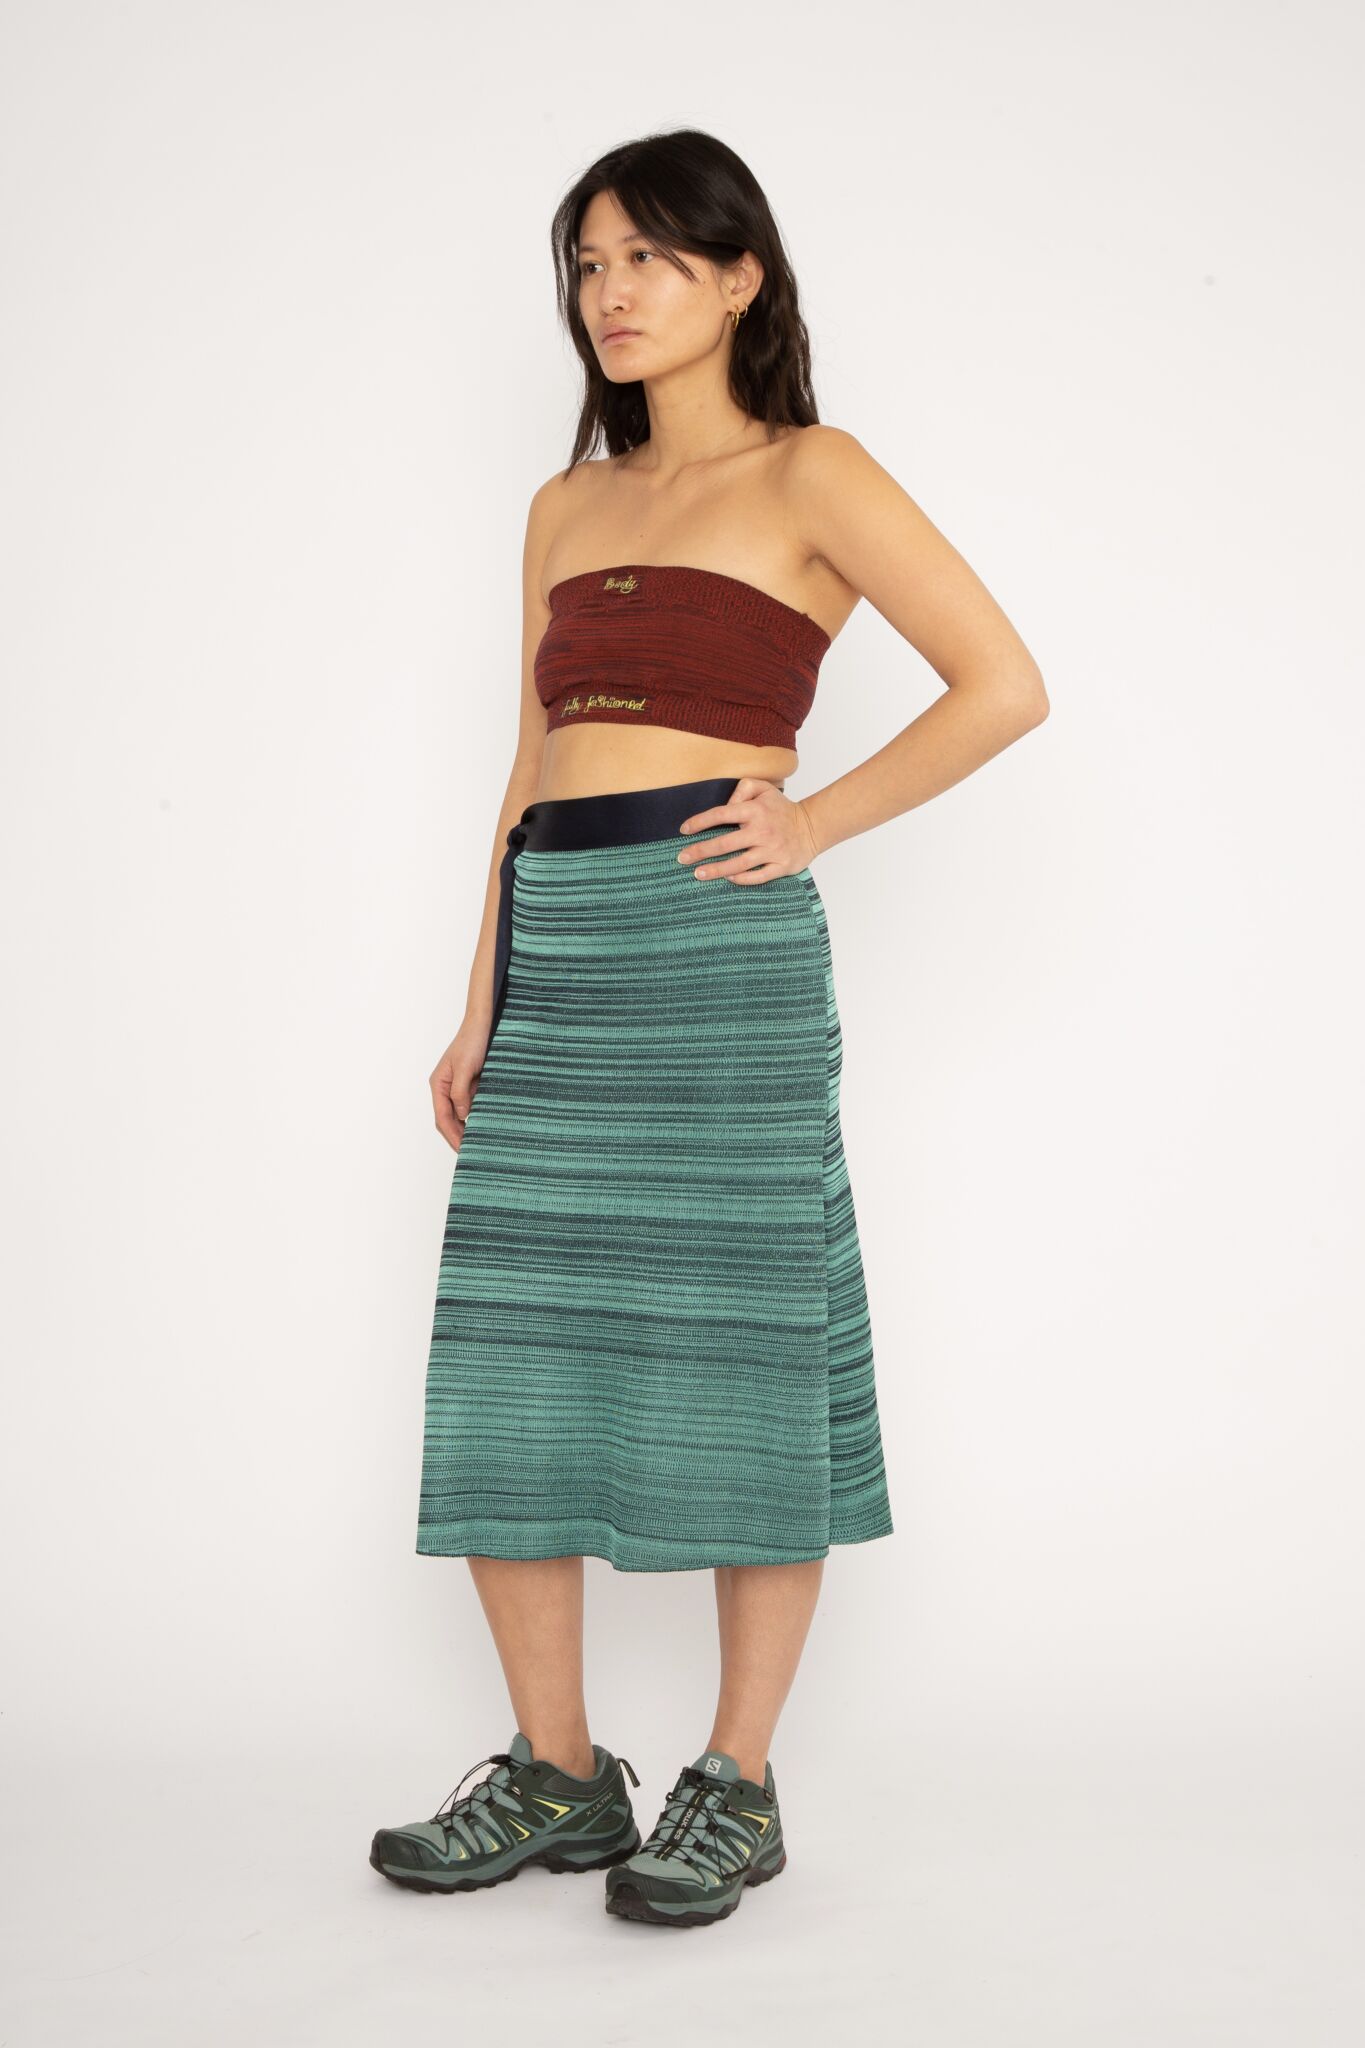 Melange Skirt in navy and teal is a knitted melange slip skirt with long ties to adjust the fit with. The textile has a shine to it and is lightweight with a smooth and soft feel against the body. The skirt is slightly stretchy and very comfortable to wear. The Melange Skirt is available in 3 different sizes.